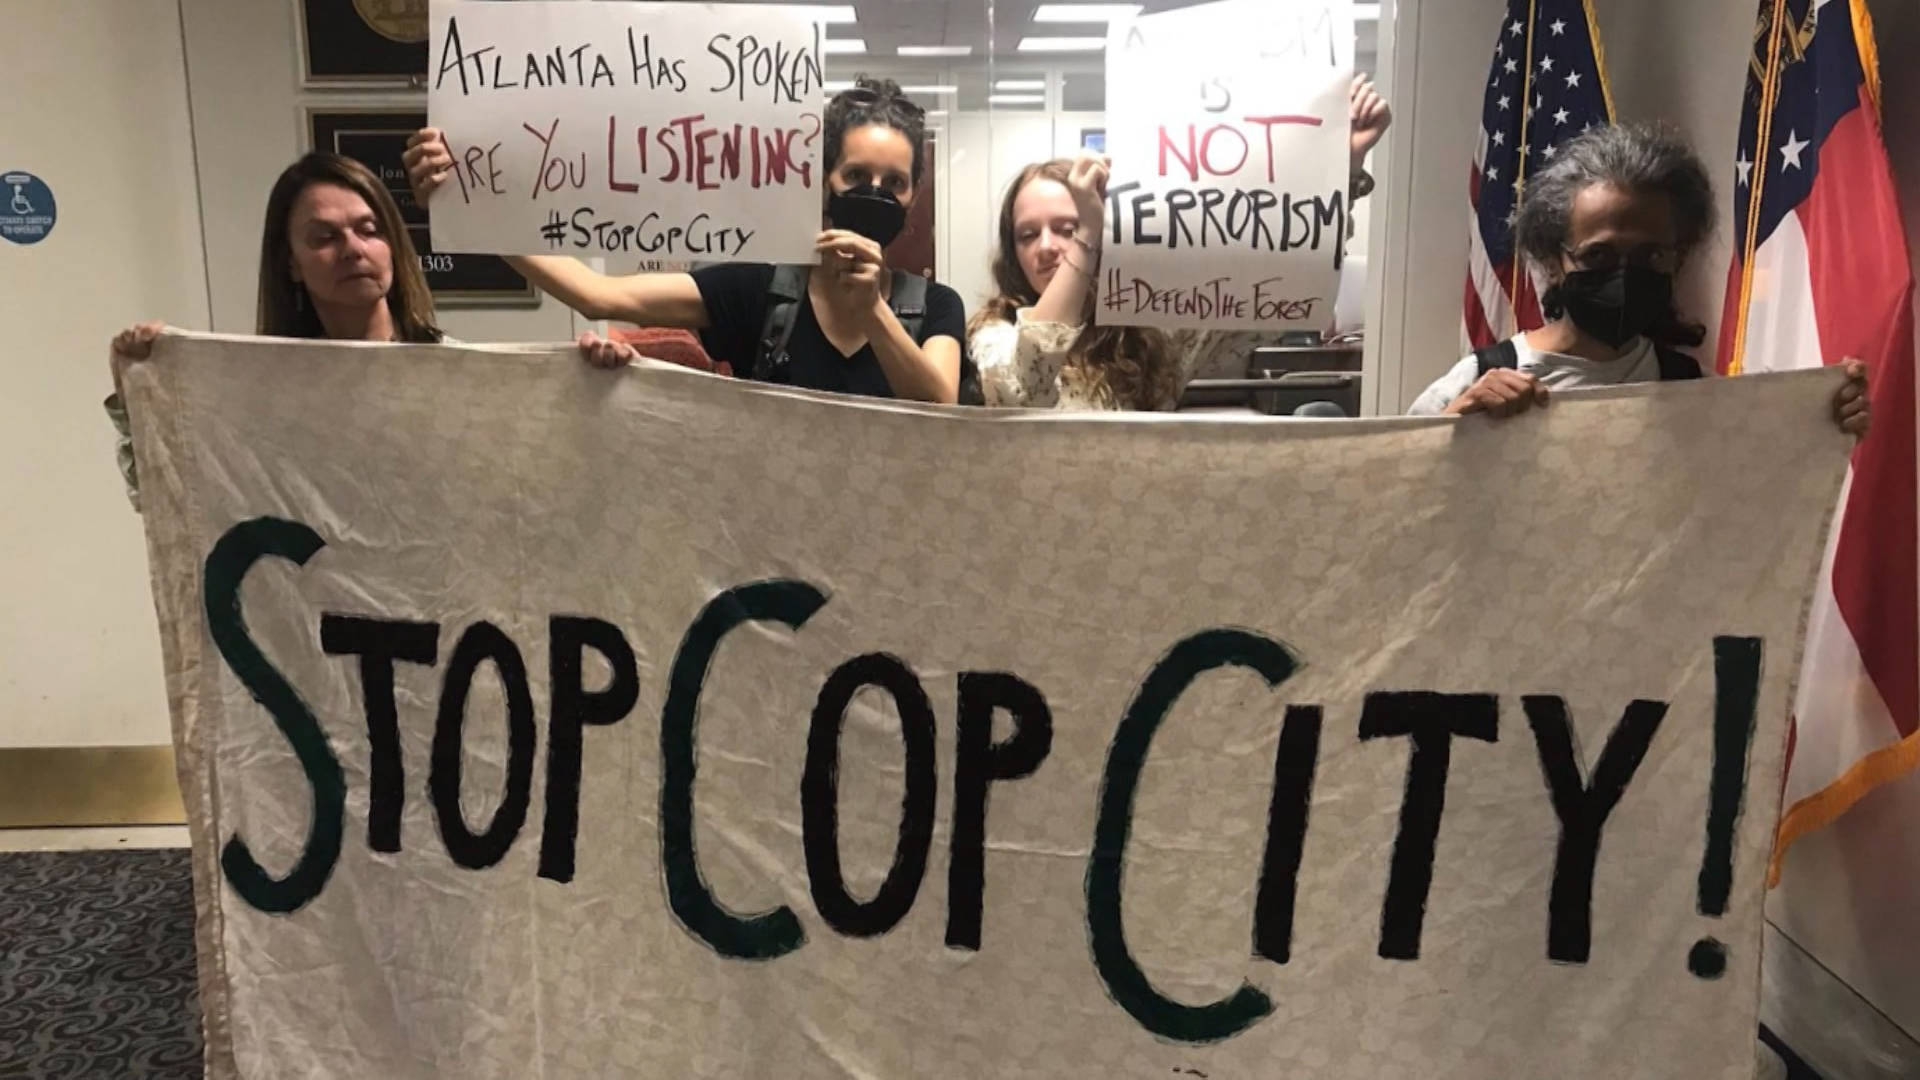 DHS says the Cop City protesters are not domestic terrorists, as designated by Georgia law enforcement